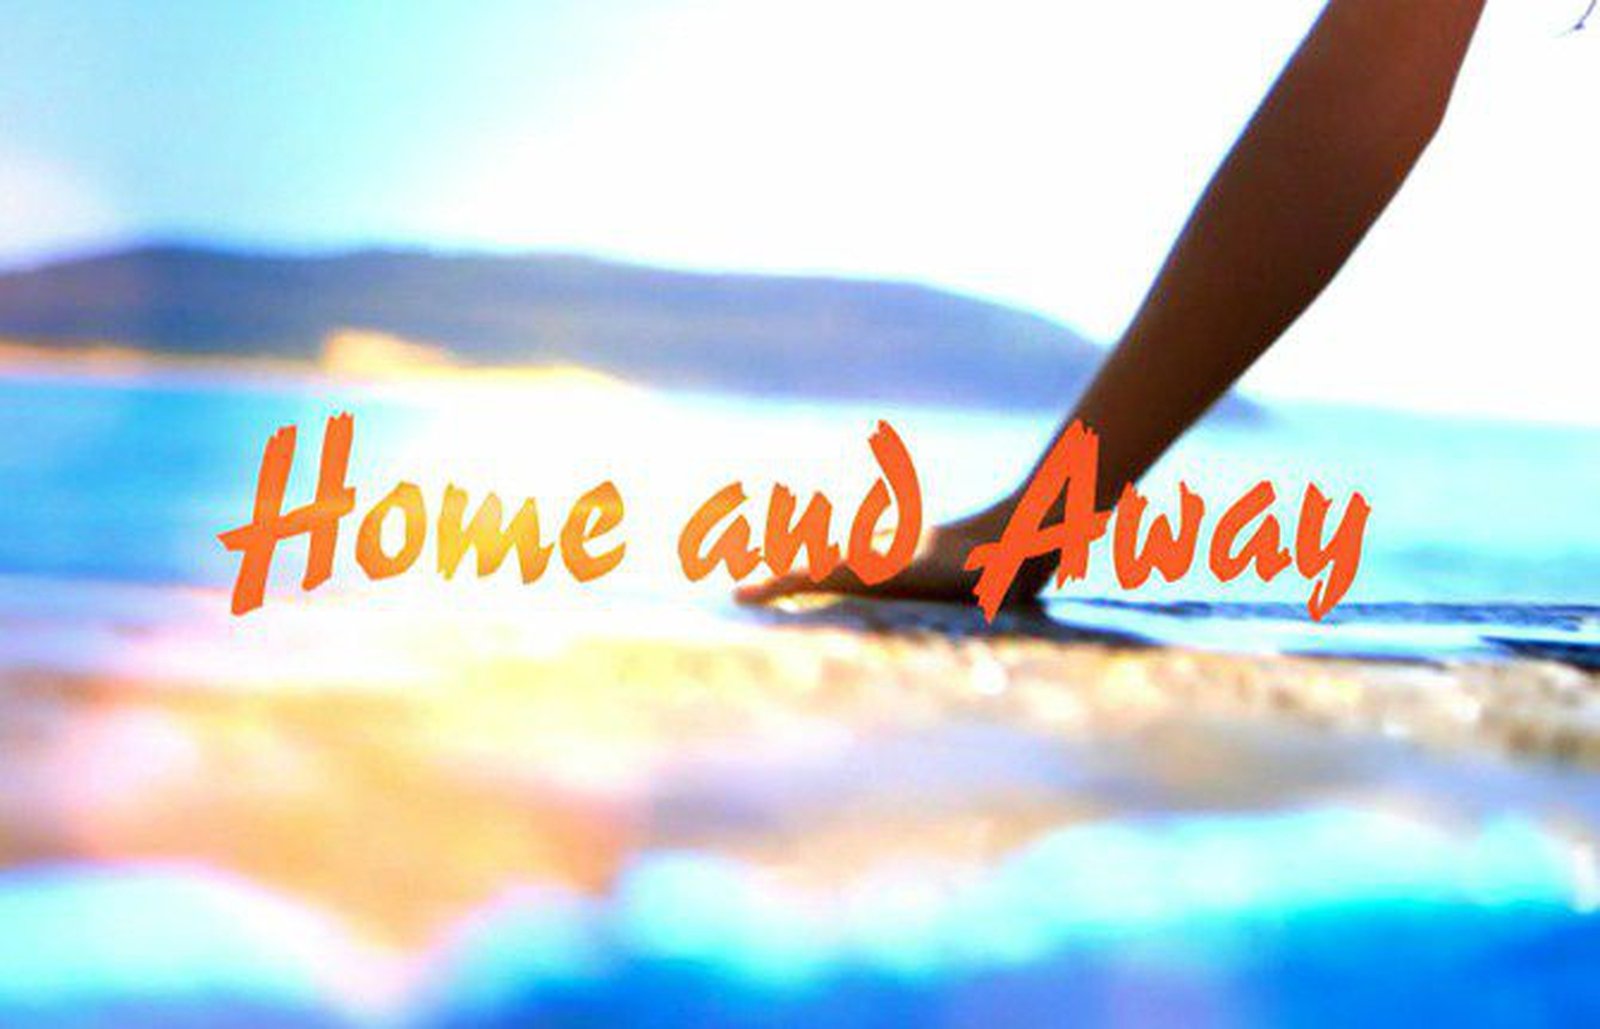 Home and away ebony episode